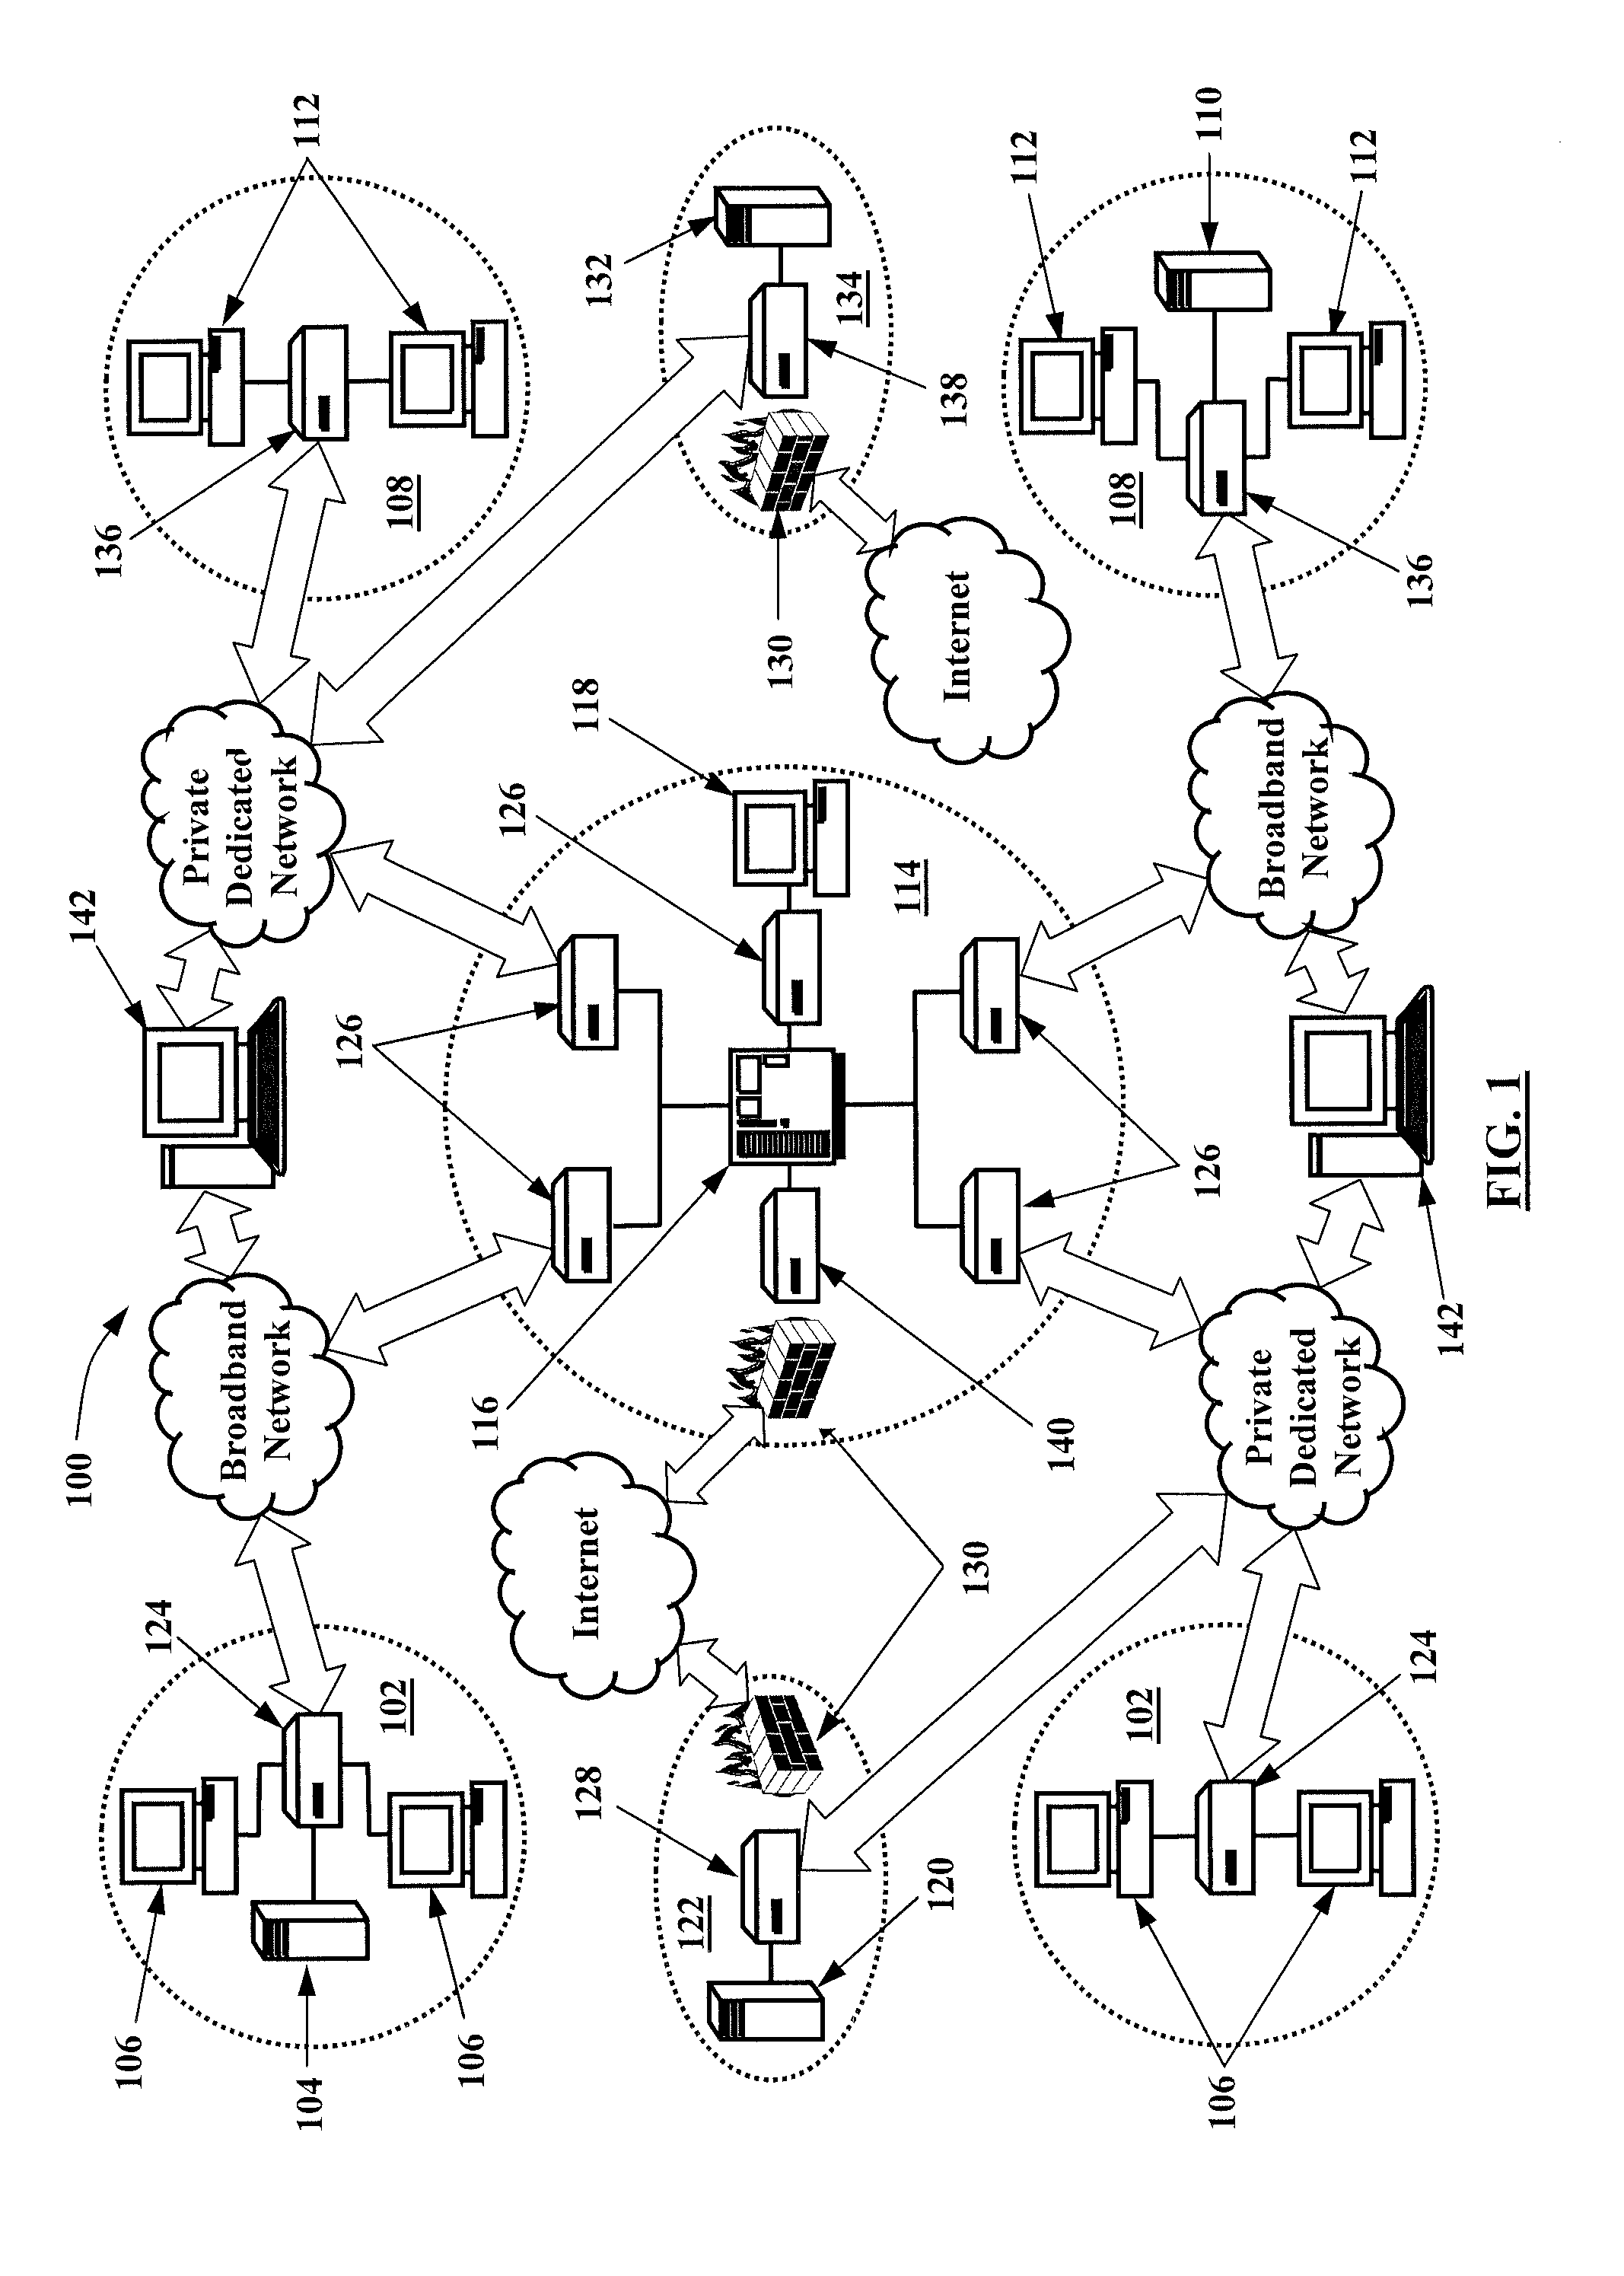 System and method for tracking and reporting clinical events across a vast patient population